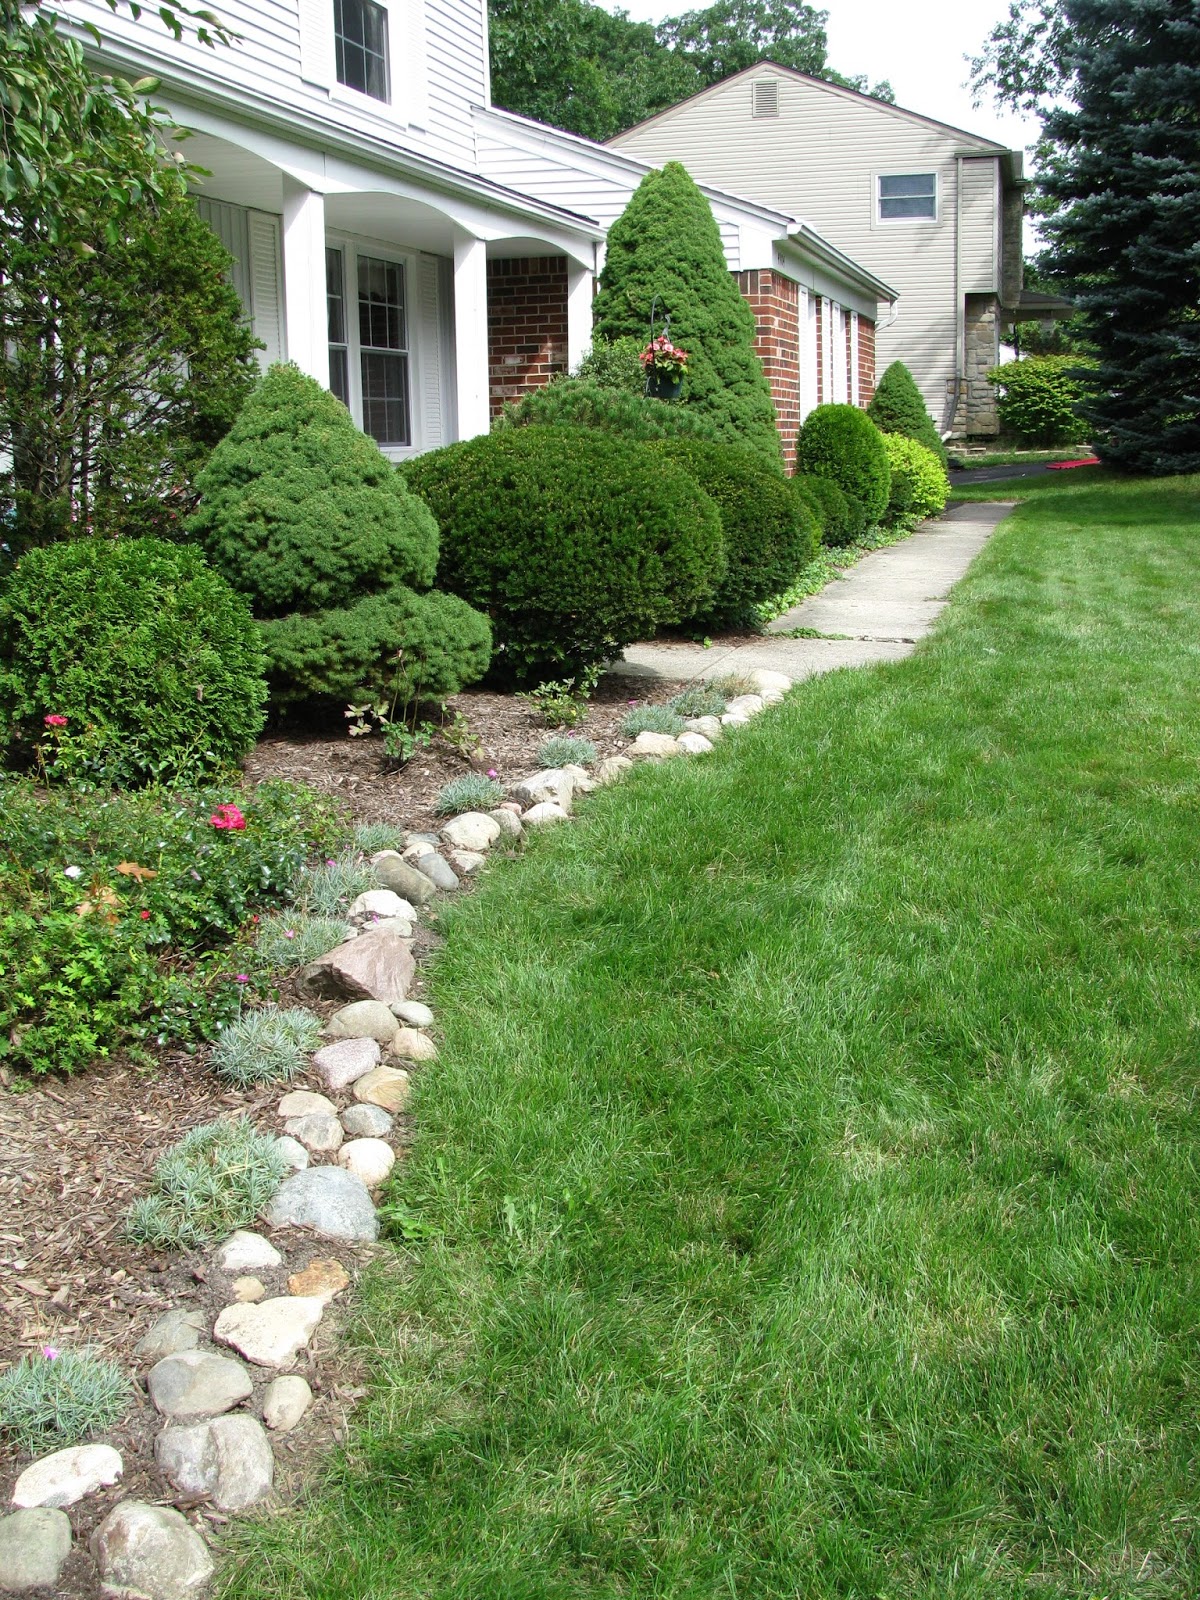 Designing Dreams on a Dime: Dream Driveway and Luxurious Landscaping